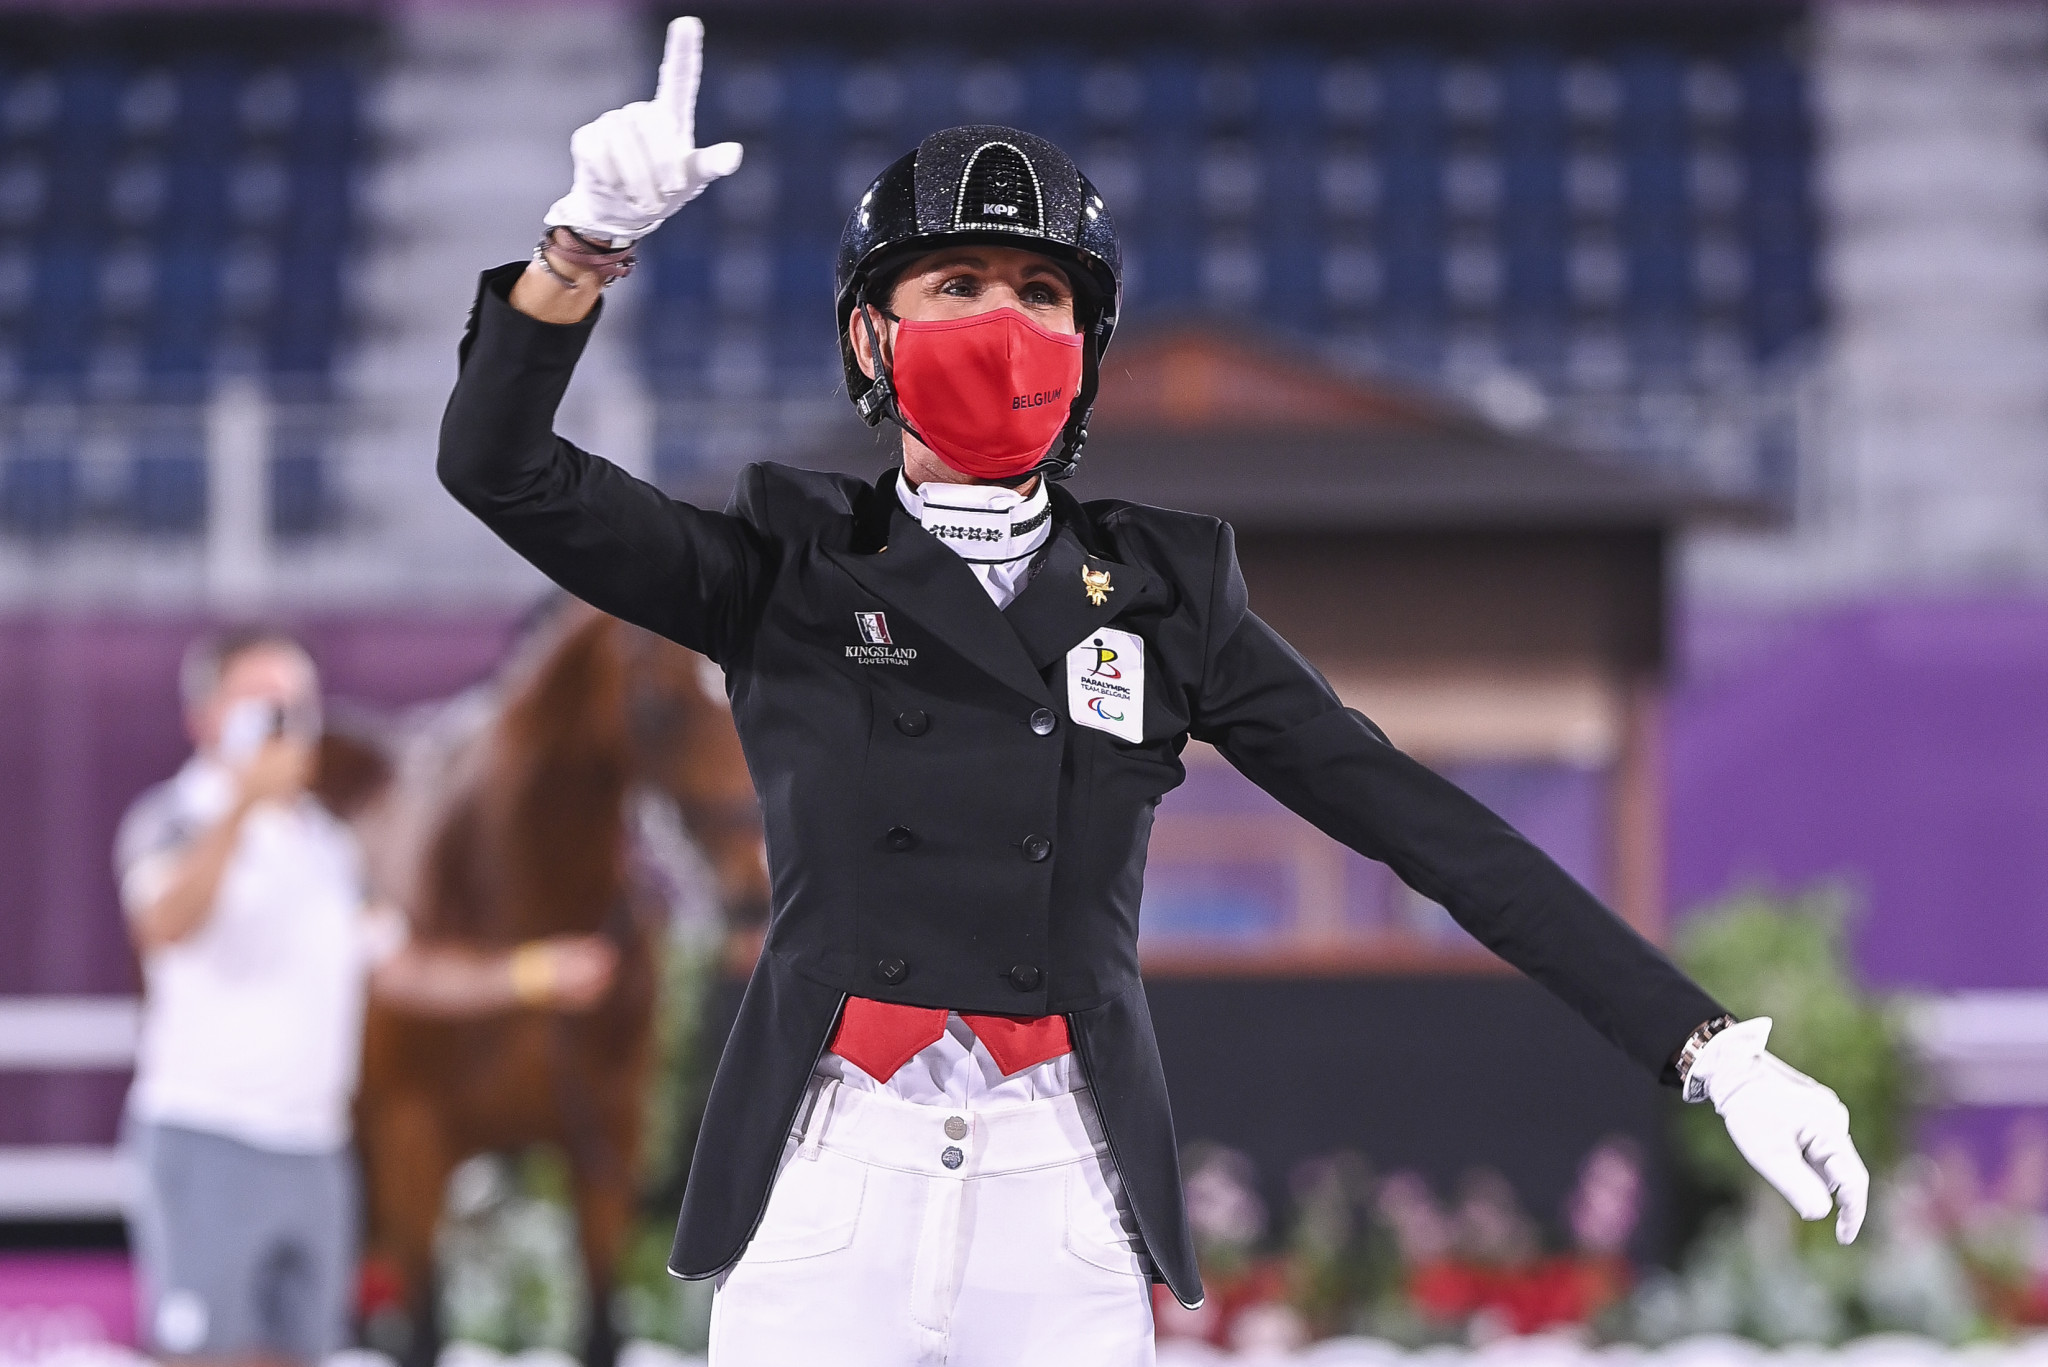 Belgium's Michele George won Para-dressage gold as equestrian competition concluded ©Getty Images